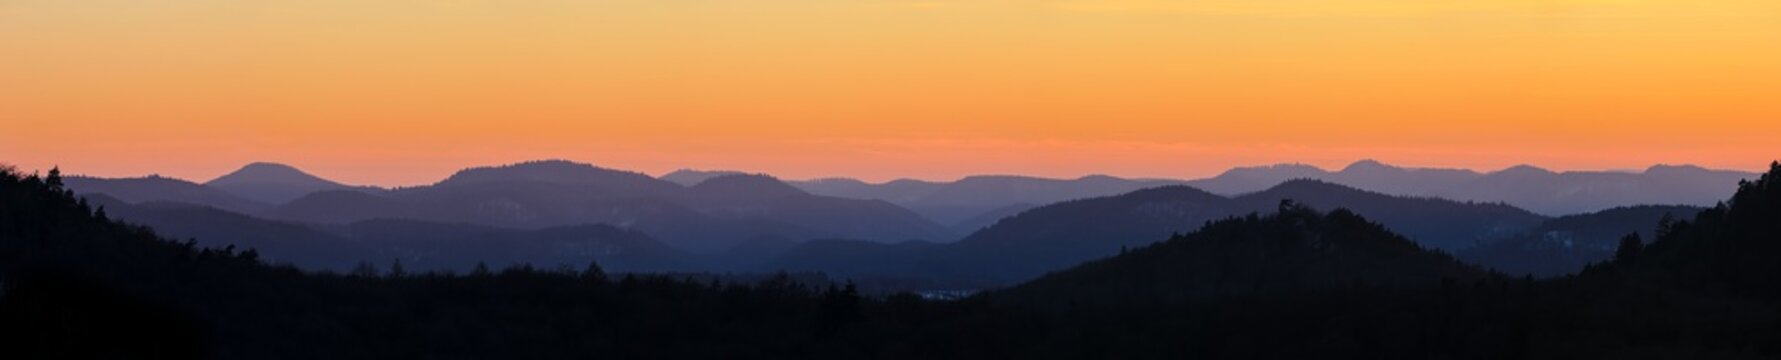 mountain layers after sunset during golden hour, orange sky, mountain silhouettes, sky during dusk